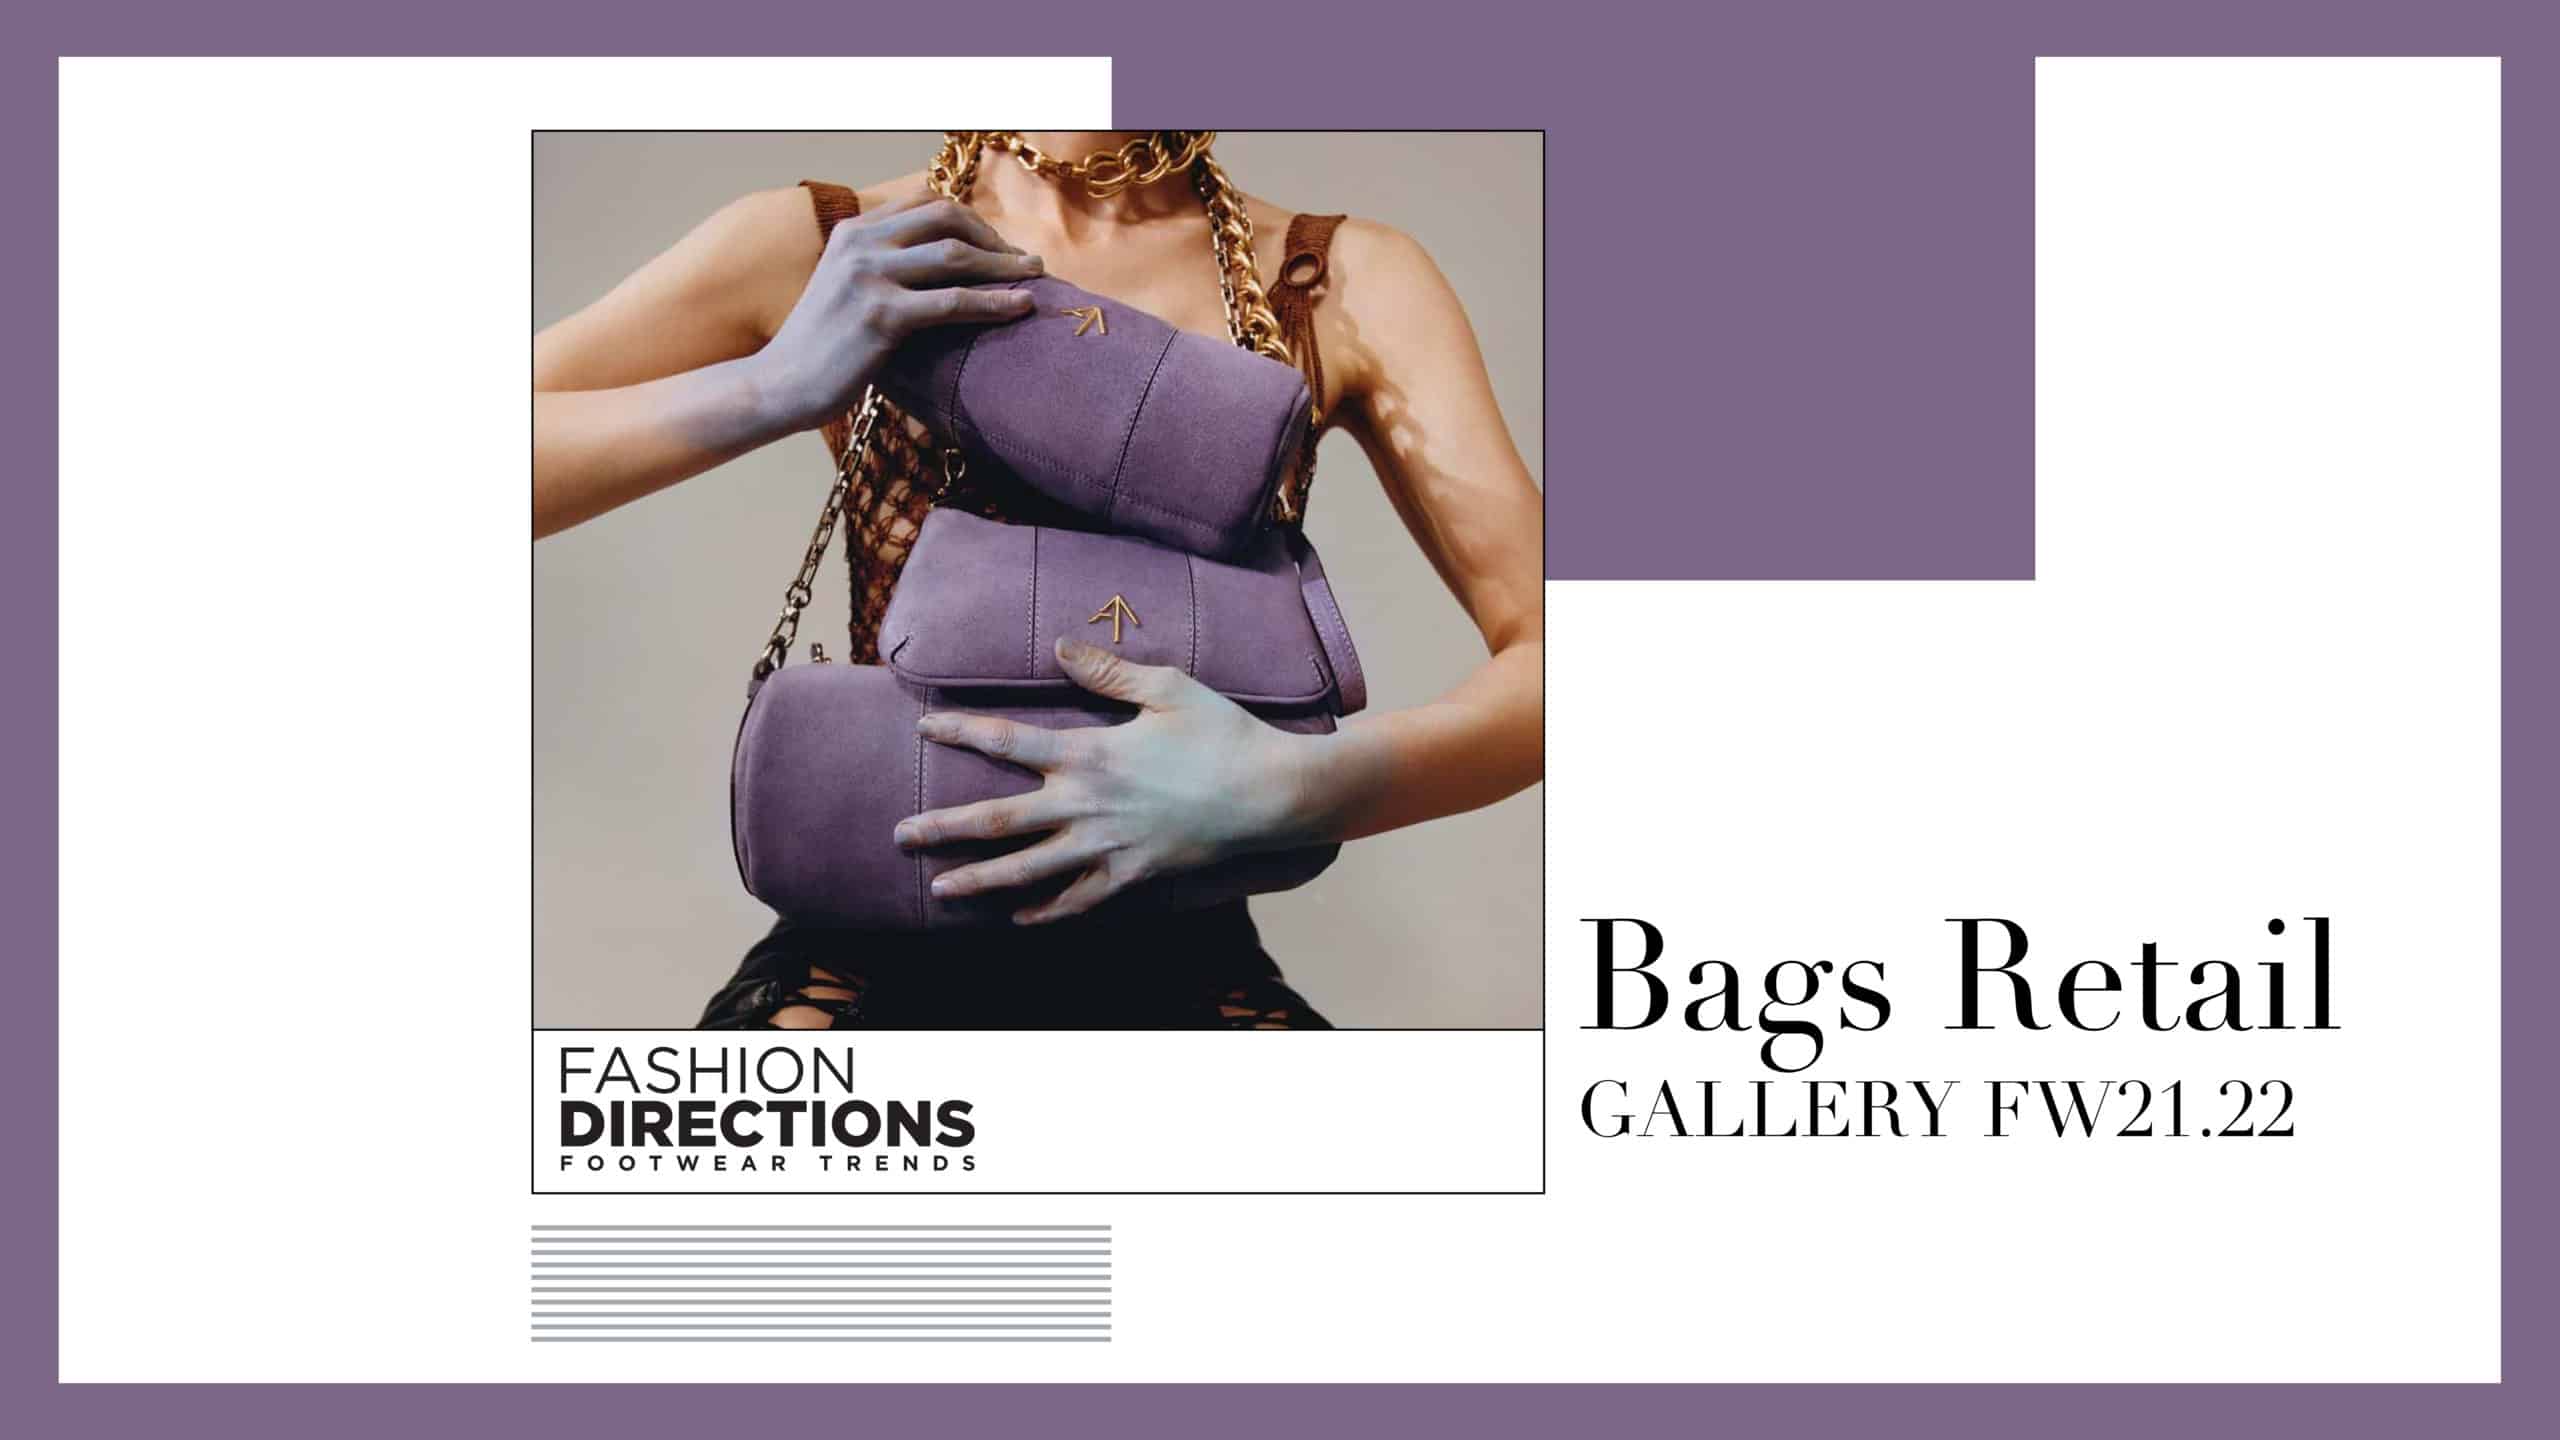 bags retail fw21.22 Gallery